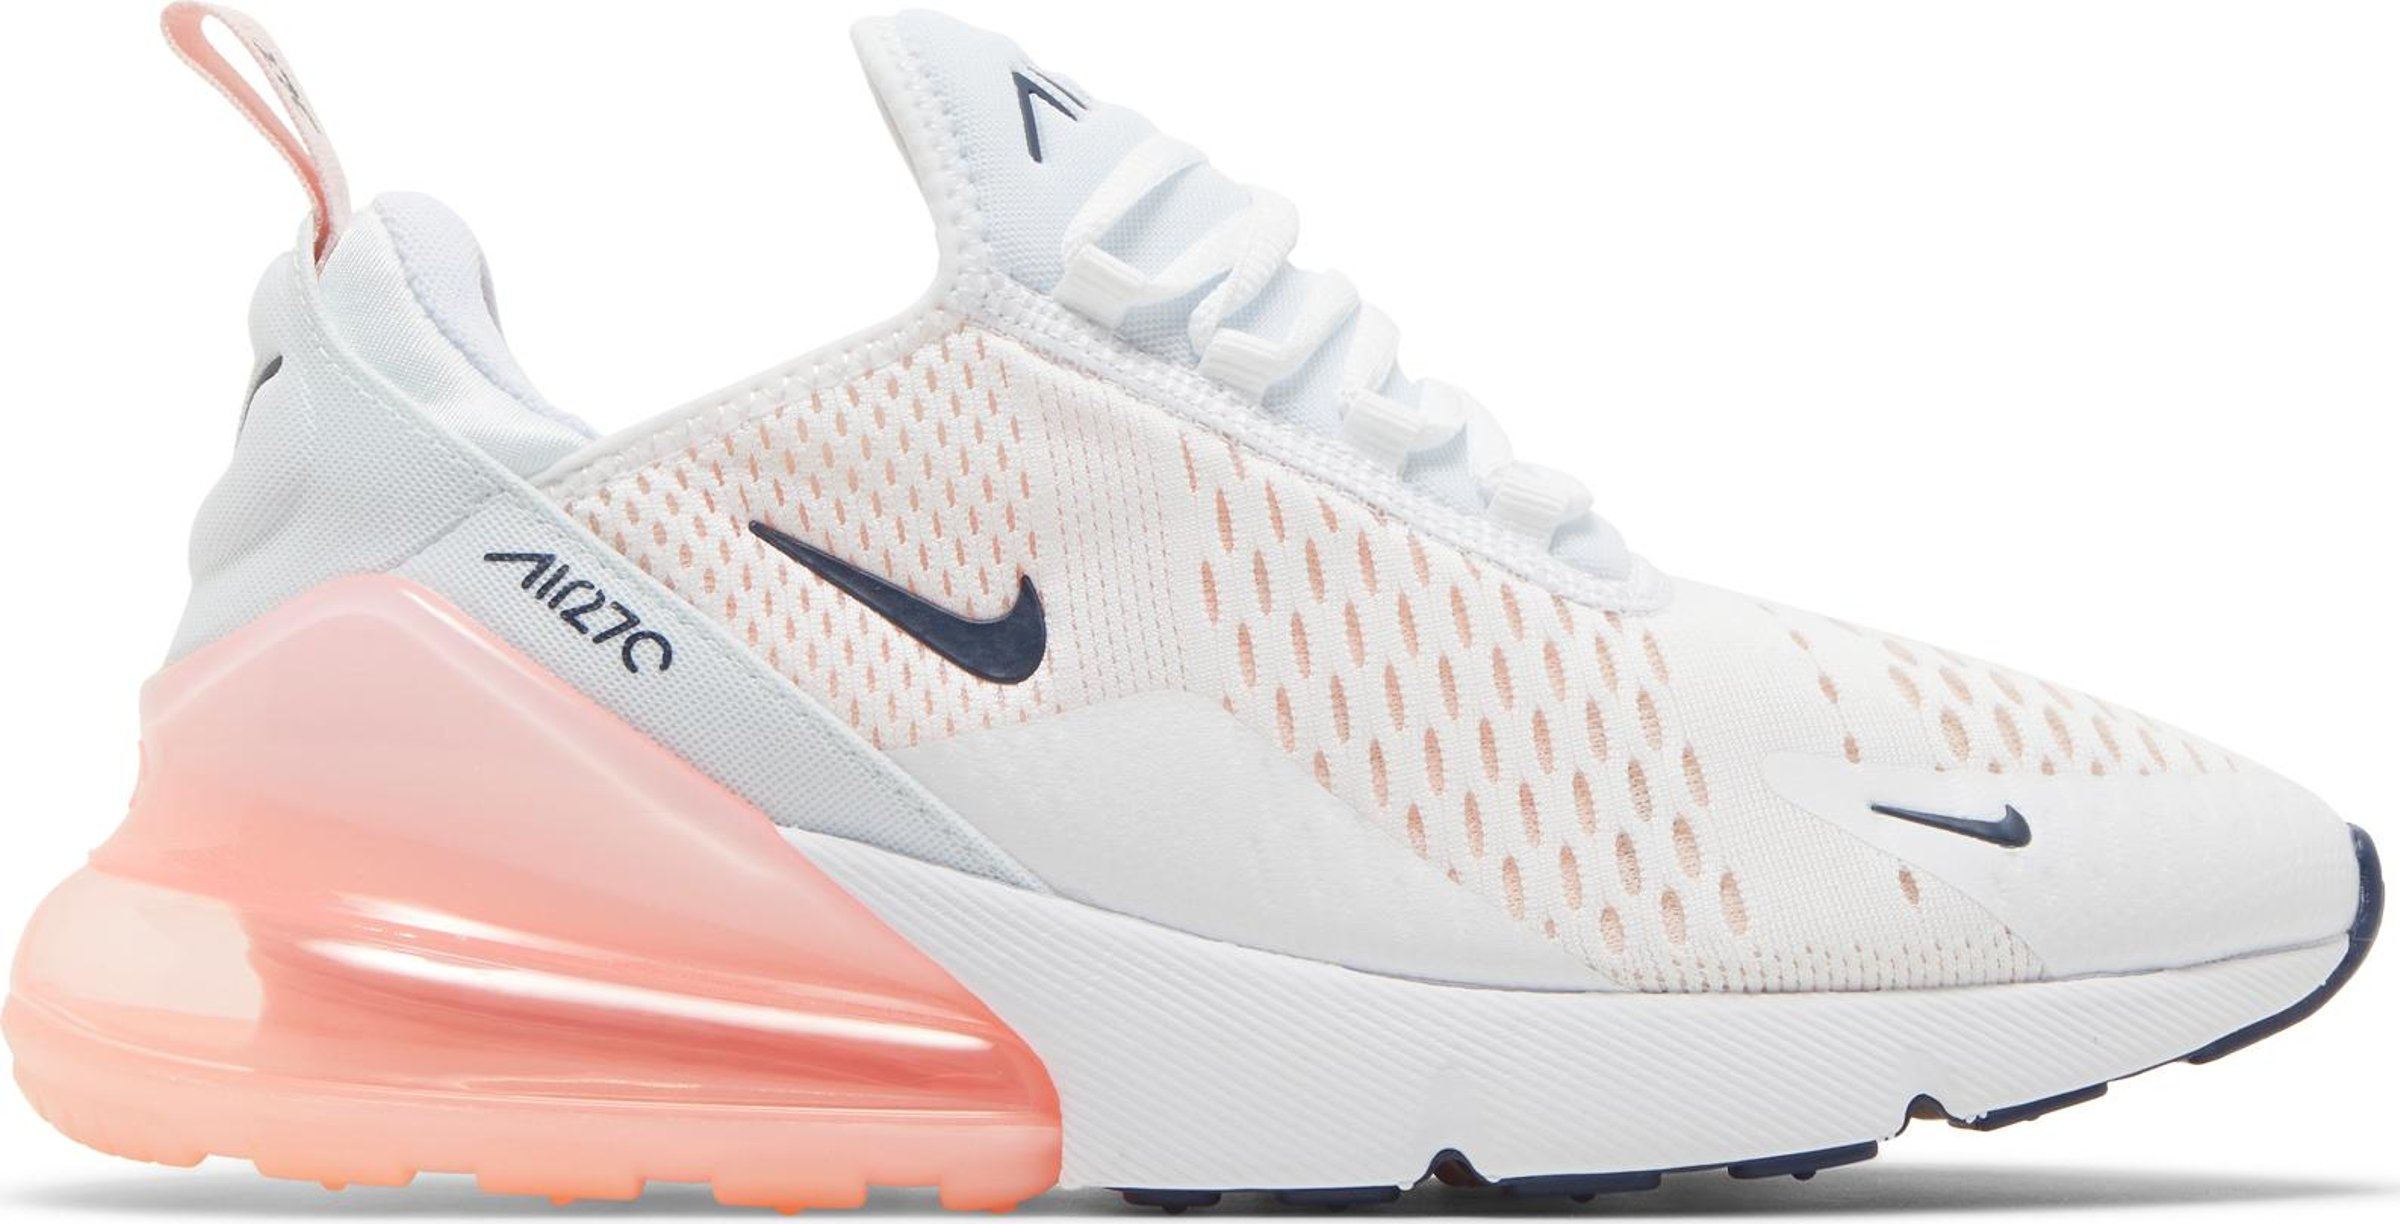 Buy Wmns Air Max 270 'White Bleached Coral' - AH6789 110 | GOAT